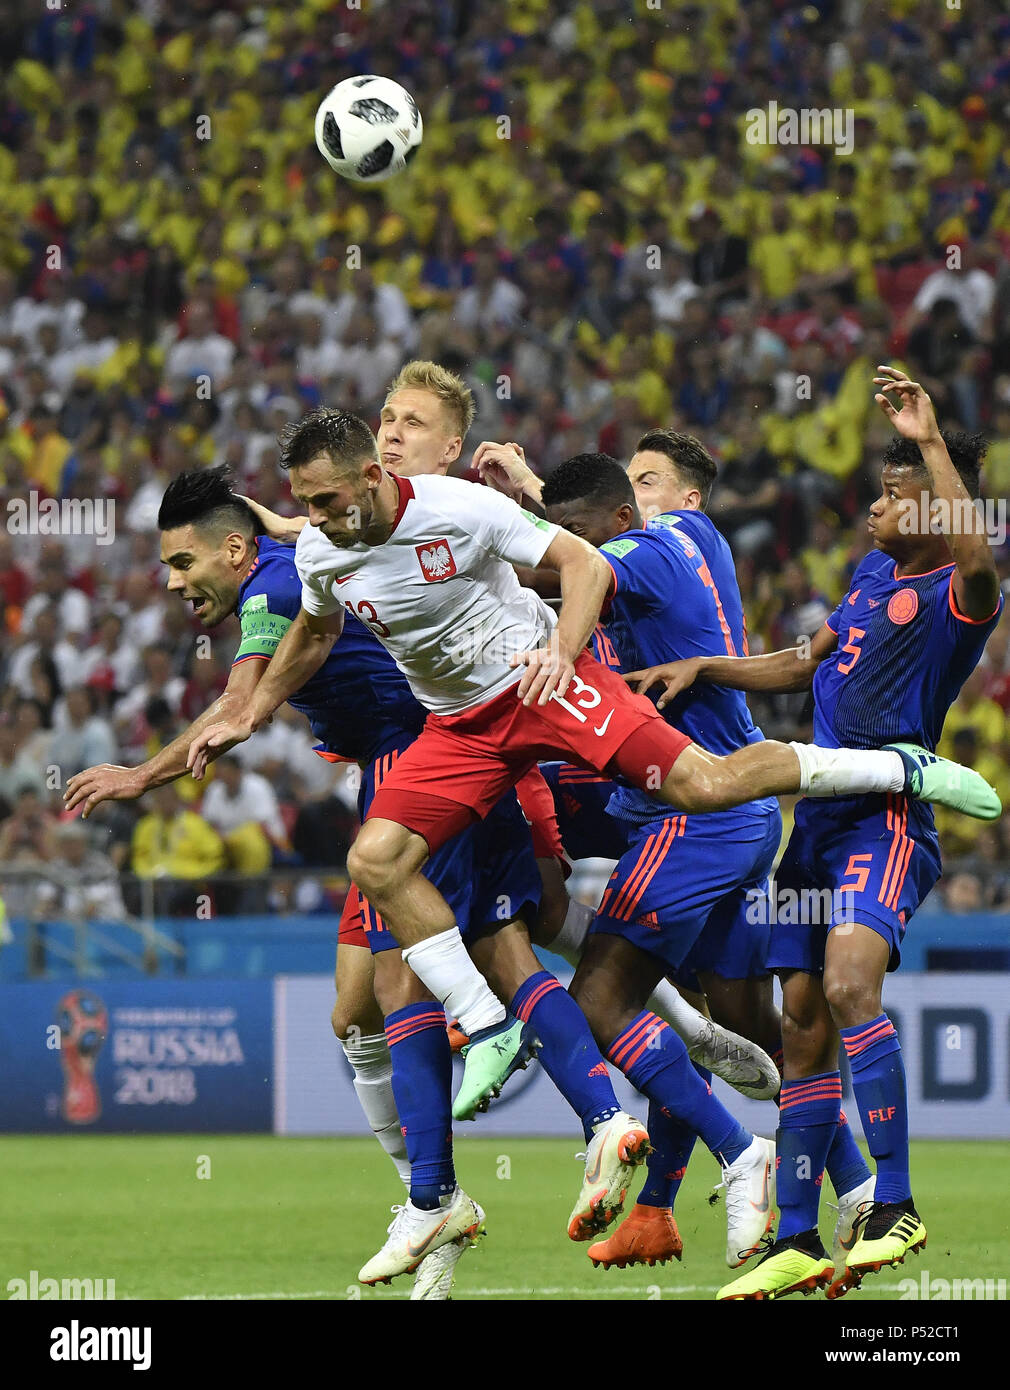 Kazan, Russia. 24th June, 2018. Maciej Rybus (2nd L) of Poland competes for a header during the 2018 FIFA World Cup Group H match between Poland and Colombia in Kazan, Russia, June 24, 2018. Colombia won 3-0. Credit: He Canling/Xinhua/Alamy Live News Stock Photo